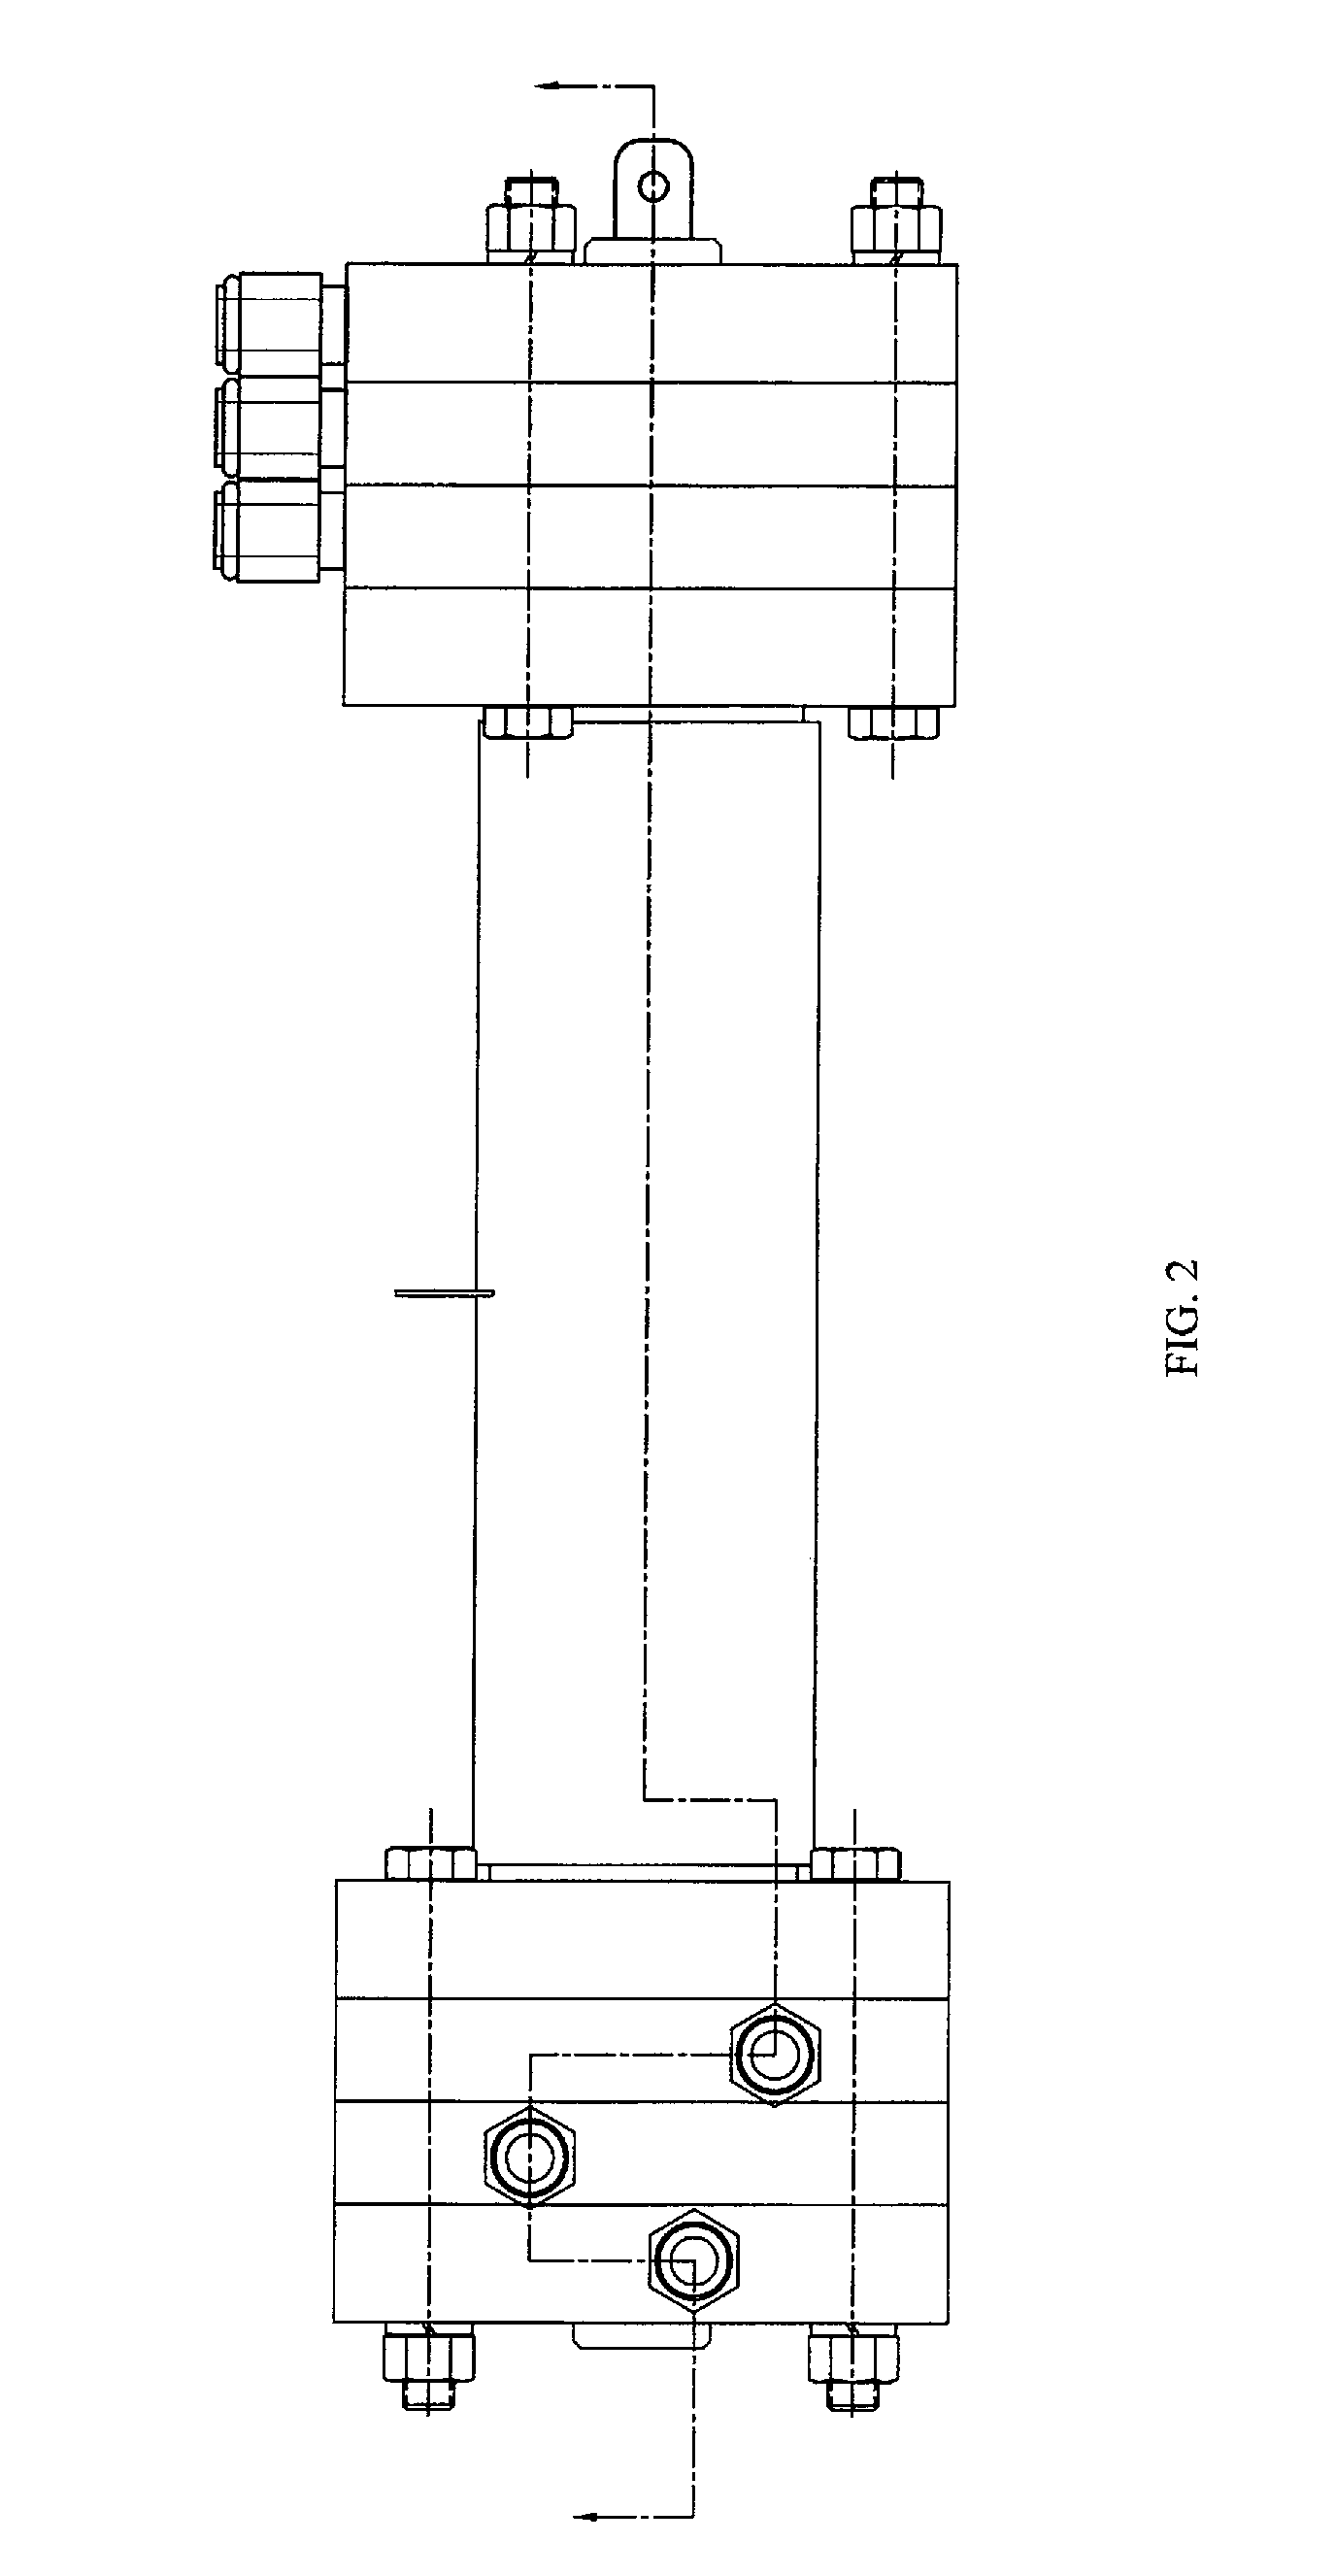 Dual diaphragm electrolysis cell assembly and method for generating a cleaning solution without any salt residues and simultaneously generating a sanitizing solution having a predetermined level of available free chlorine and pH